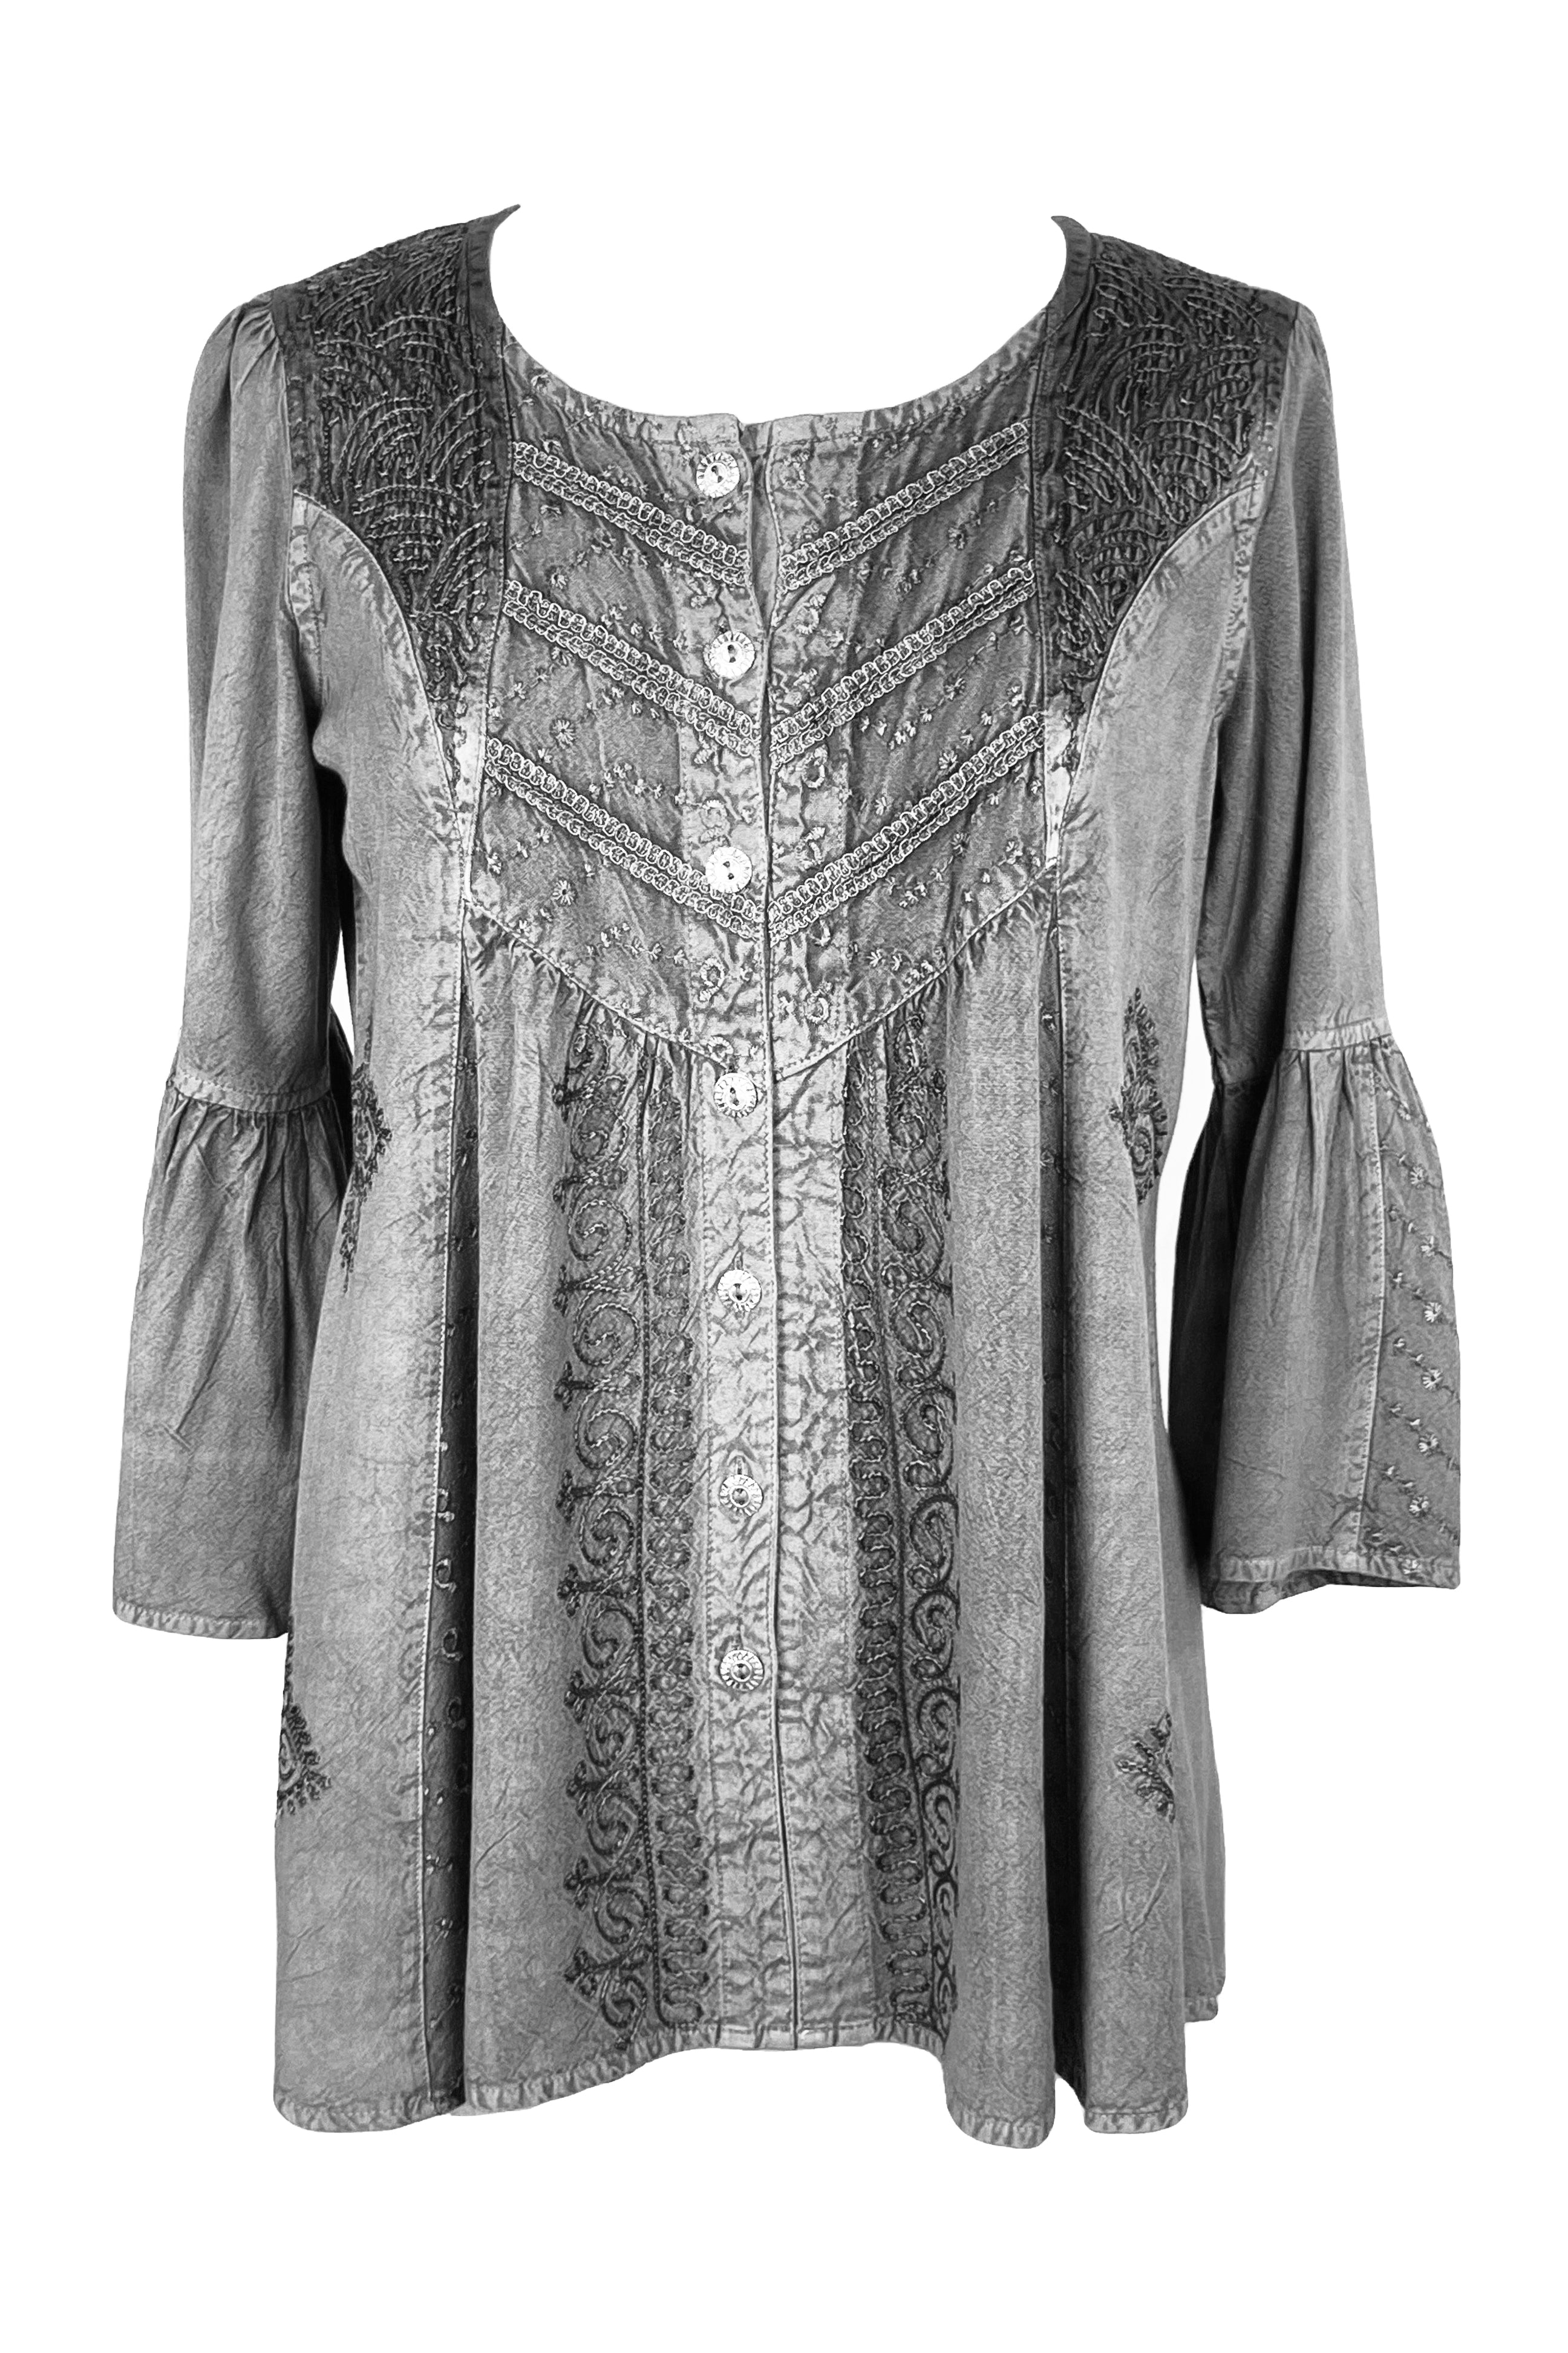 307 B Medieval Bohemian Embroidered Button Shirt Blouse – Agan Traders